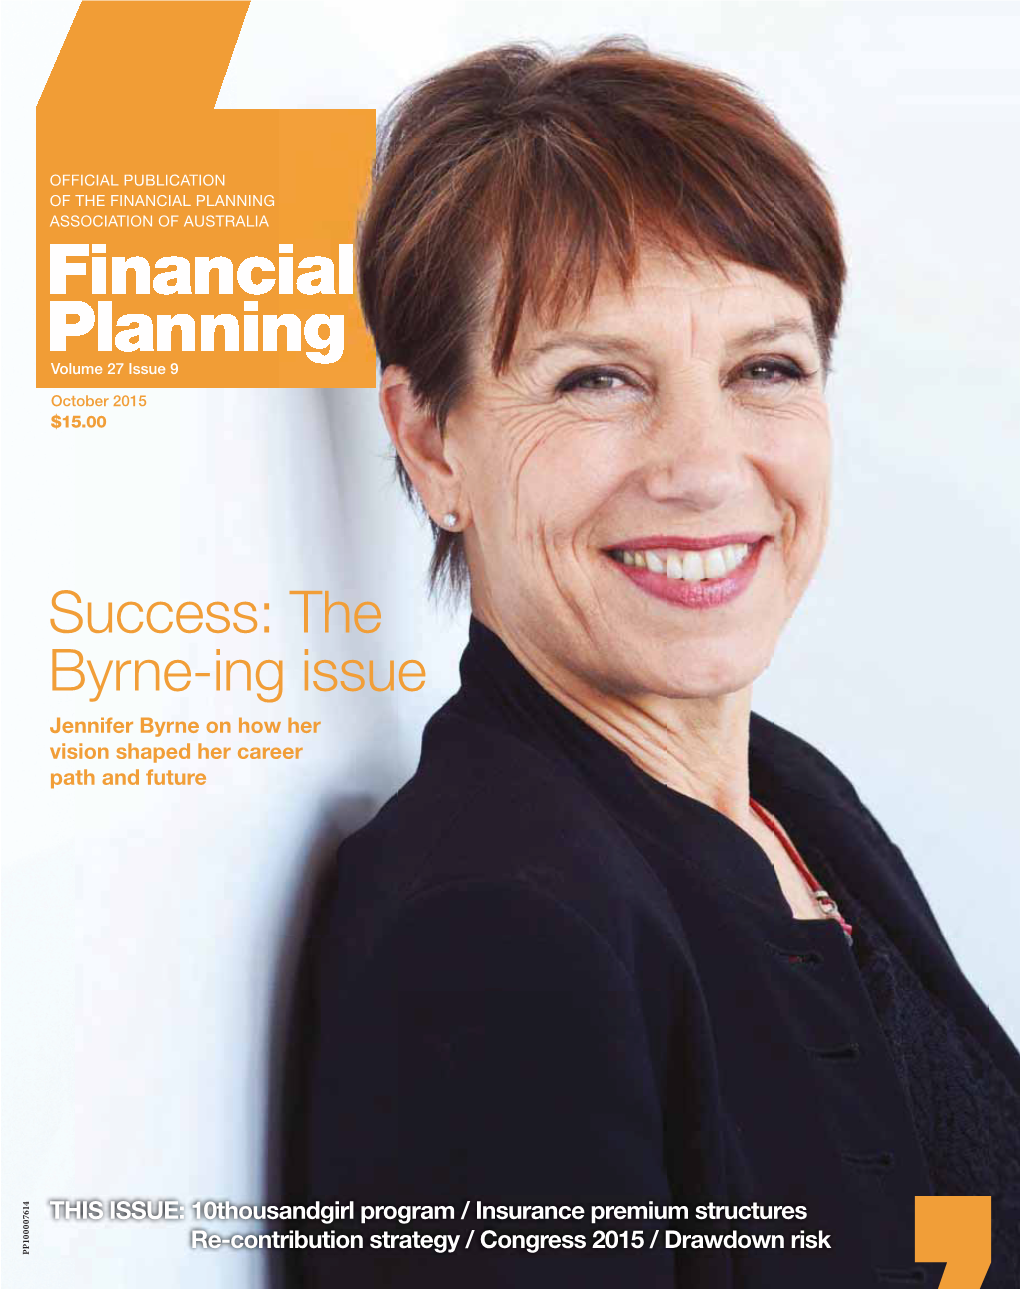 Success: the Byrne-Ing Issue Jennifer Byrne on How Her Vision Shaped Her Career Path and Future